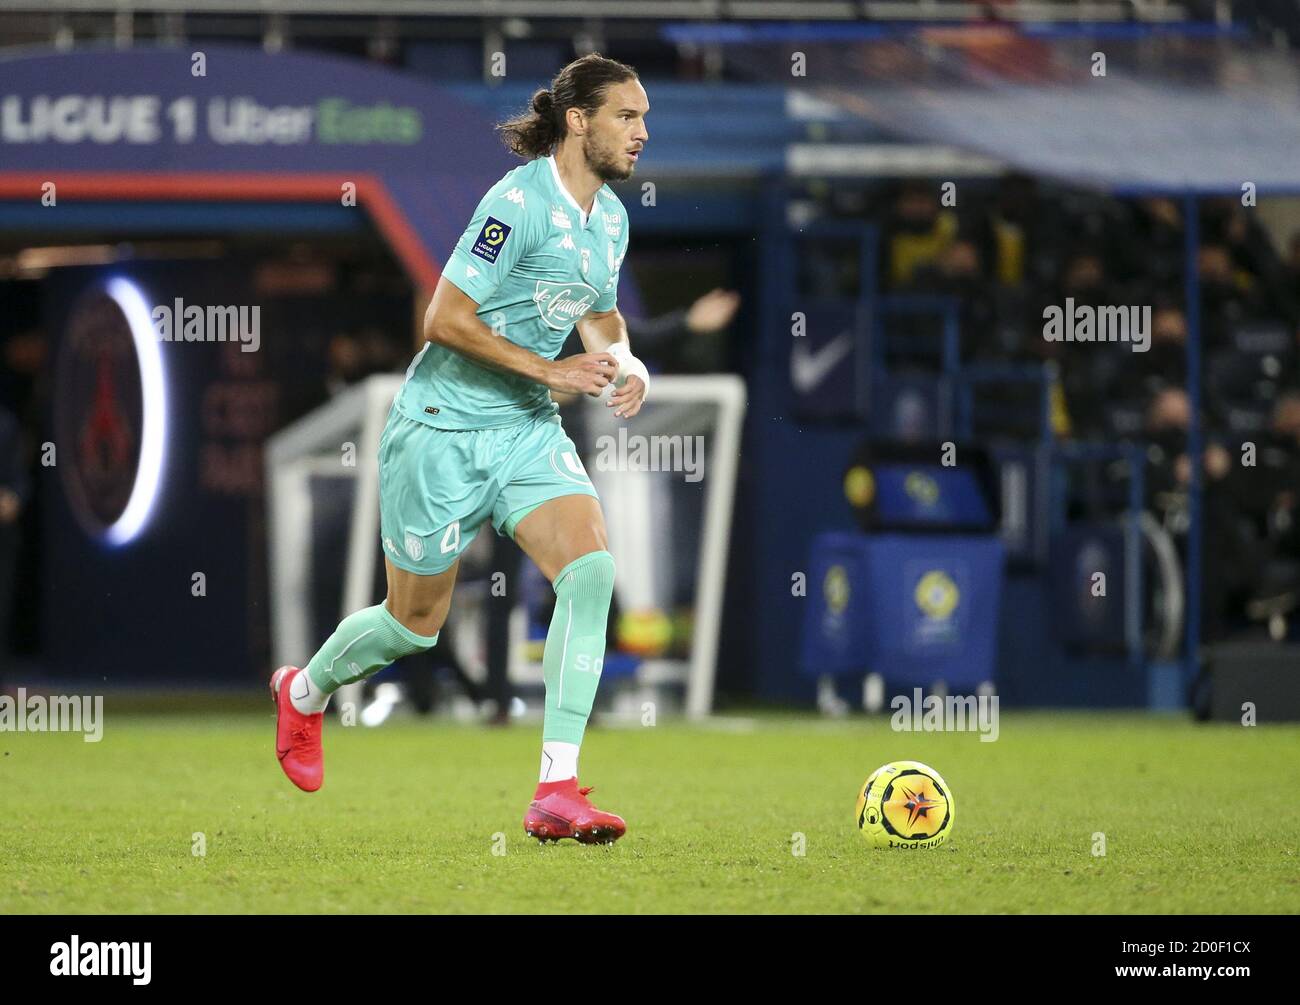 Mateo Pavlovic of Angers during the French championship Ligue 1 football match between Paris Saint-Germain (PSG) and SCO Angers on October 2, 2020 at Stock Photo